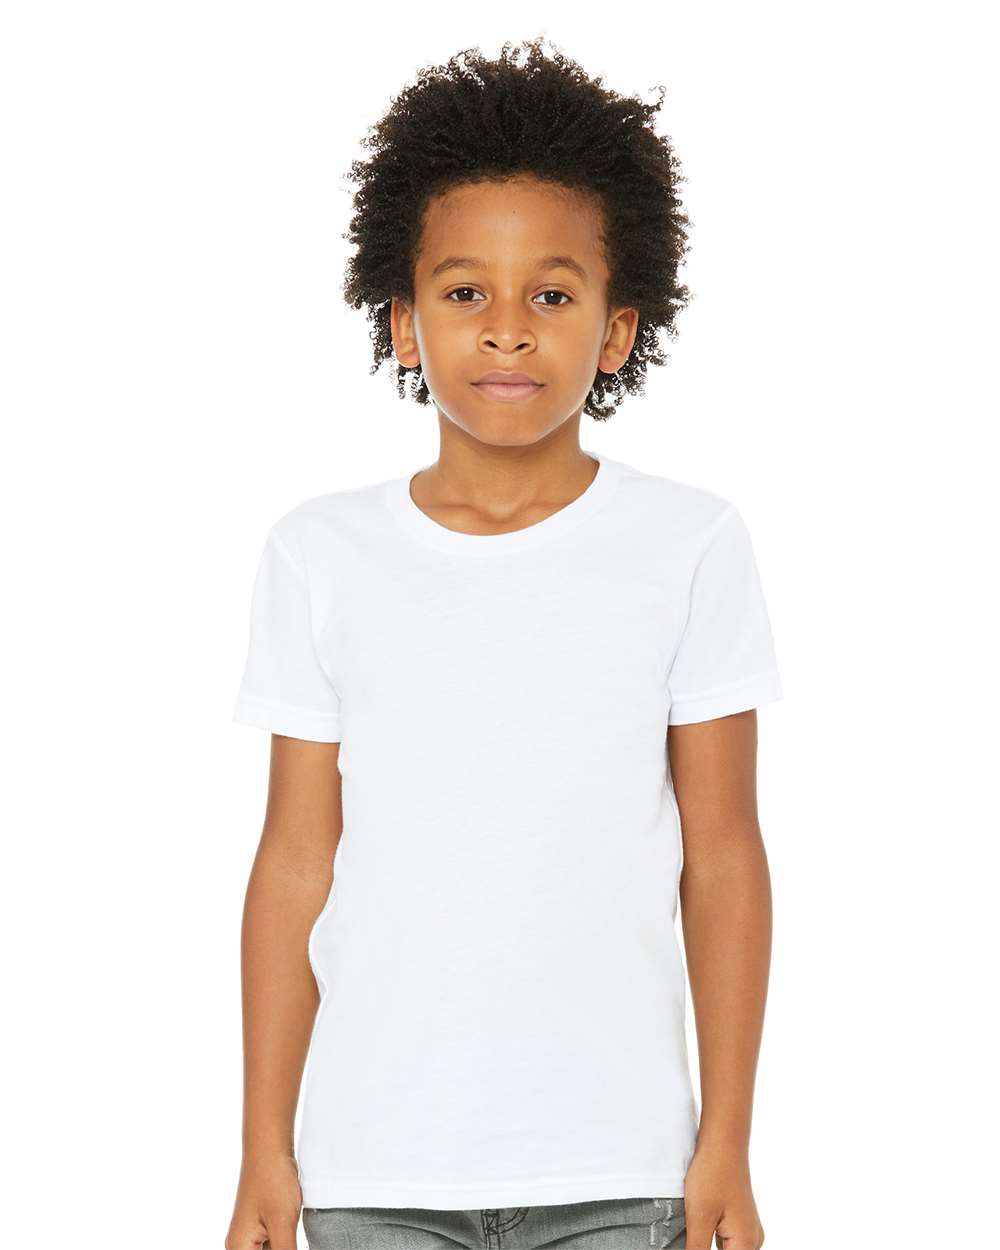 BELLA + CANVAS Youth CVC Unisex Jersey Tee 3001YCVC #colormdl_Solid White Blend